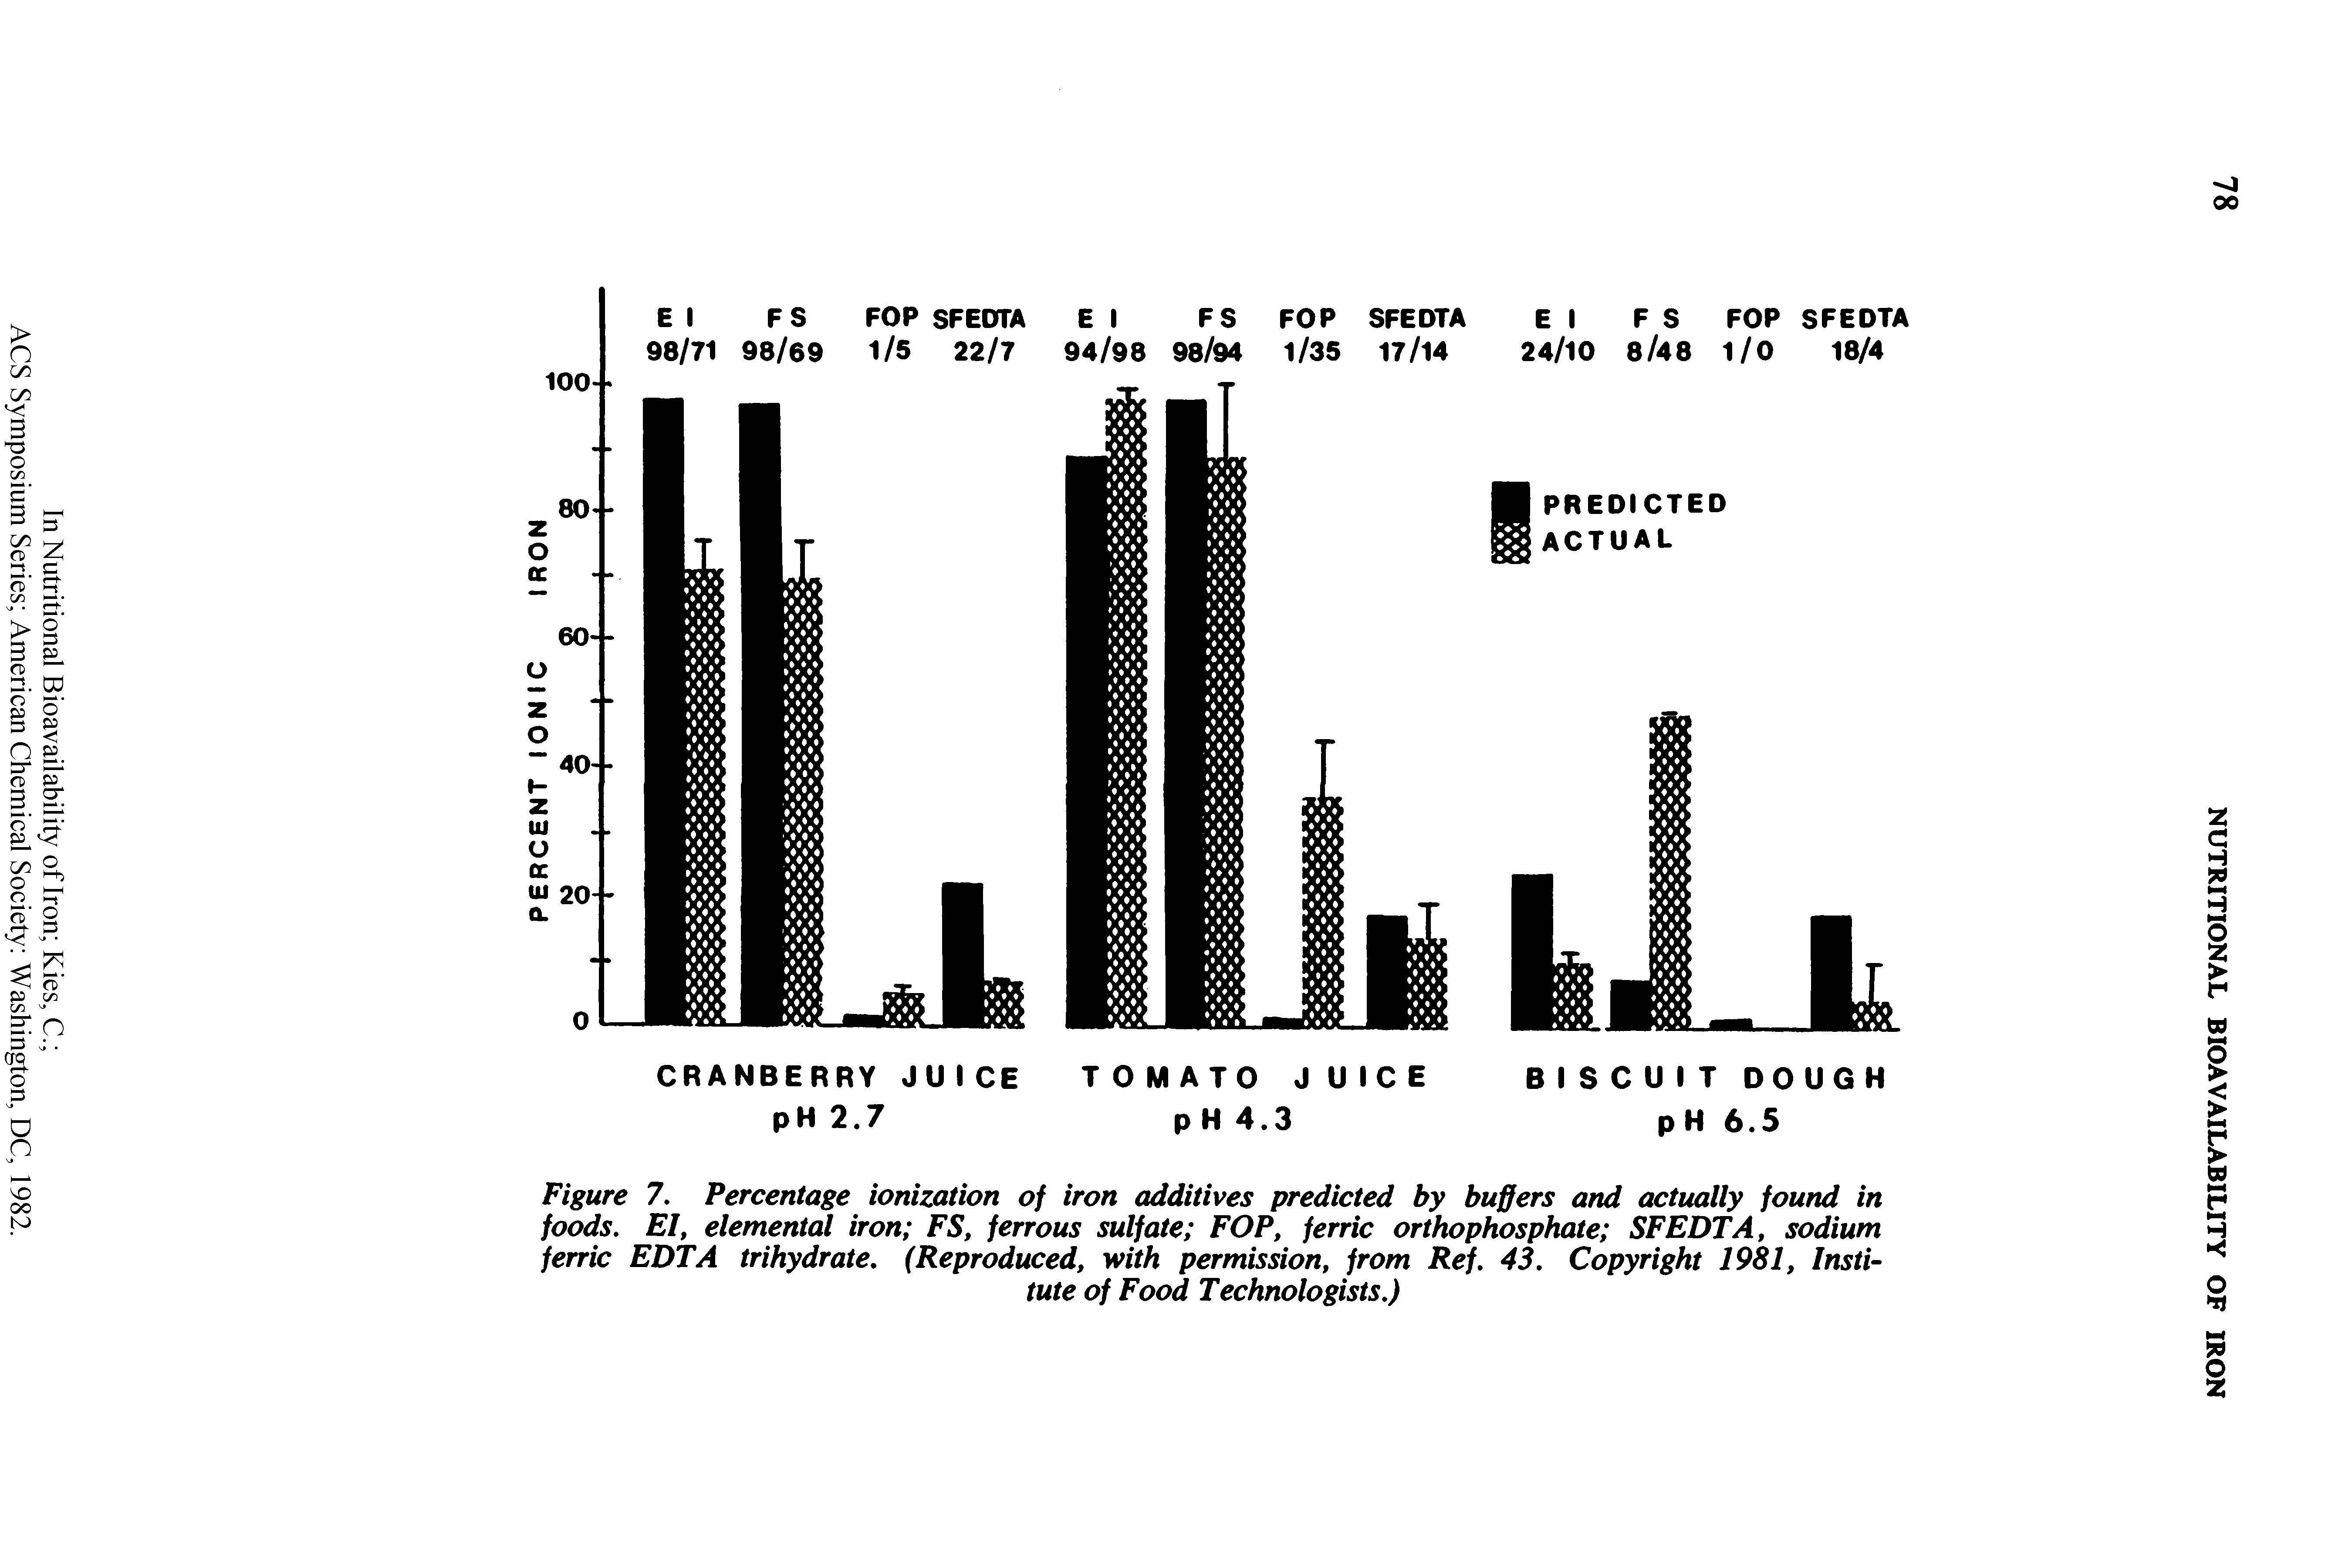 Figure 7. Percentage ionization of iron additives predicted by buffers and actually found in foods. El, elemental iron FS, ferrous sulfate FOP, ferric orthophosphate SFEDTA, sodium ferric EDTA trihydrate. (Reproduced, with permission, from Ref. 43. Copyright 1981, Institute of Food Technologists.)...